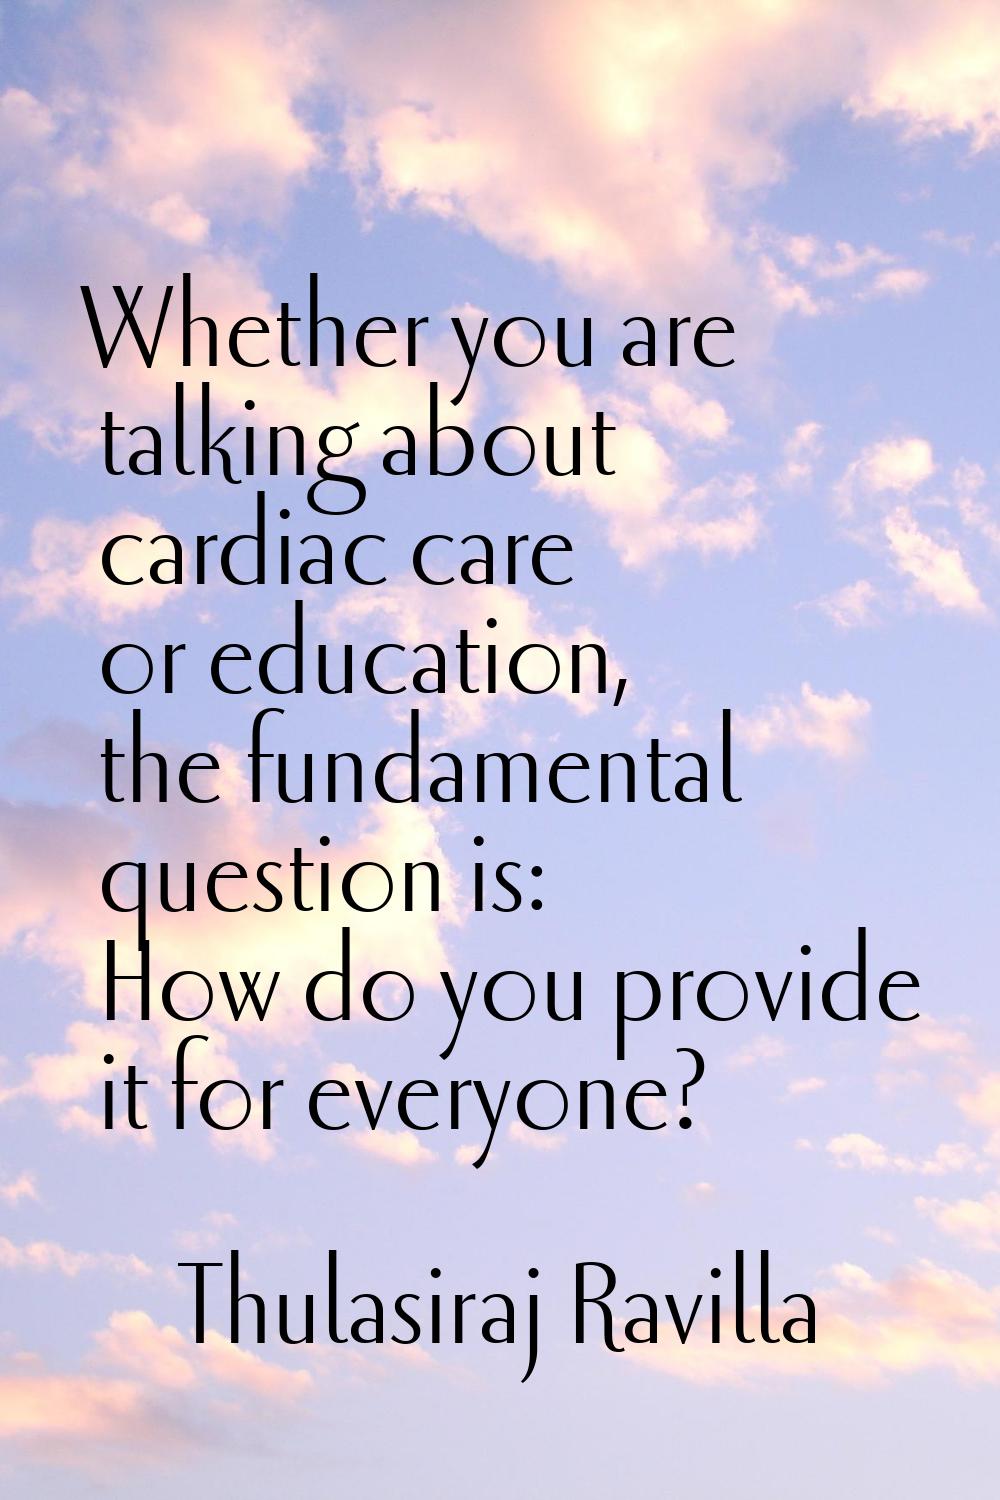 Whether you are talking about cardiac care or education, the fundamental question is: How do you pr